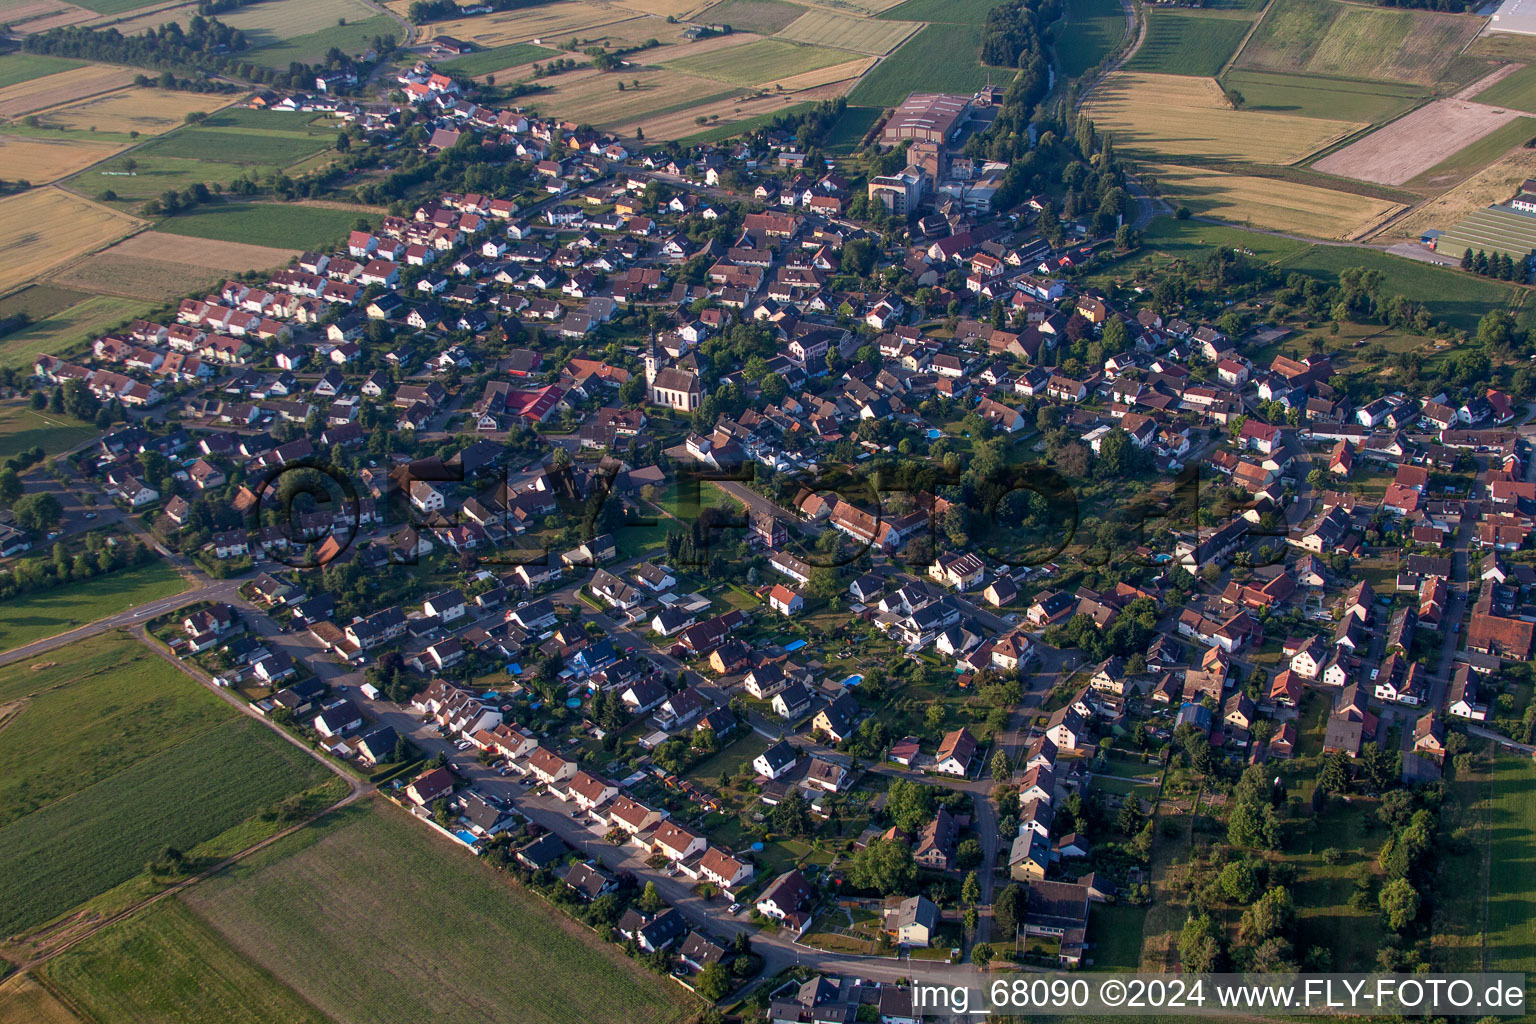 Village - view on the edge of agricultural fields and farmland in the district Hugsweier in Lahr/Schwarzwald in the state Baden-Wurttemberg, Germany